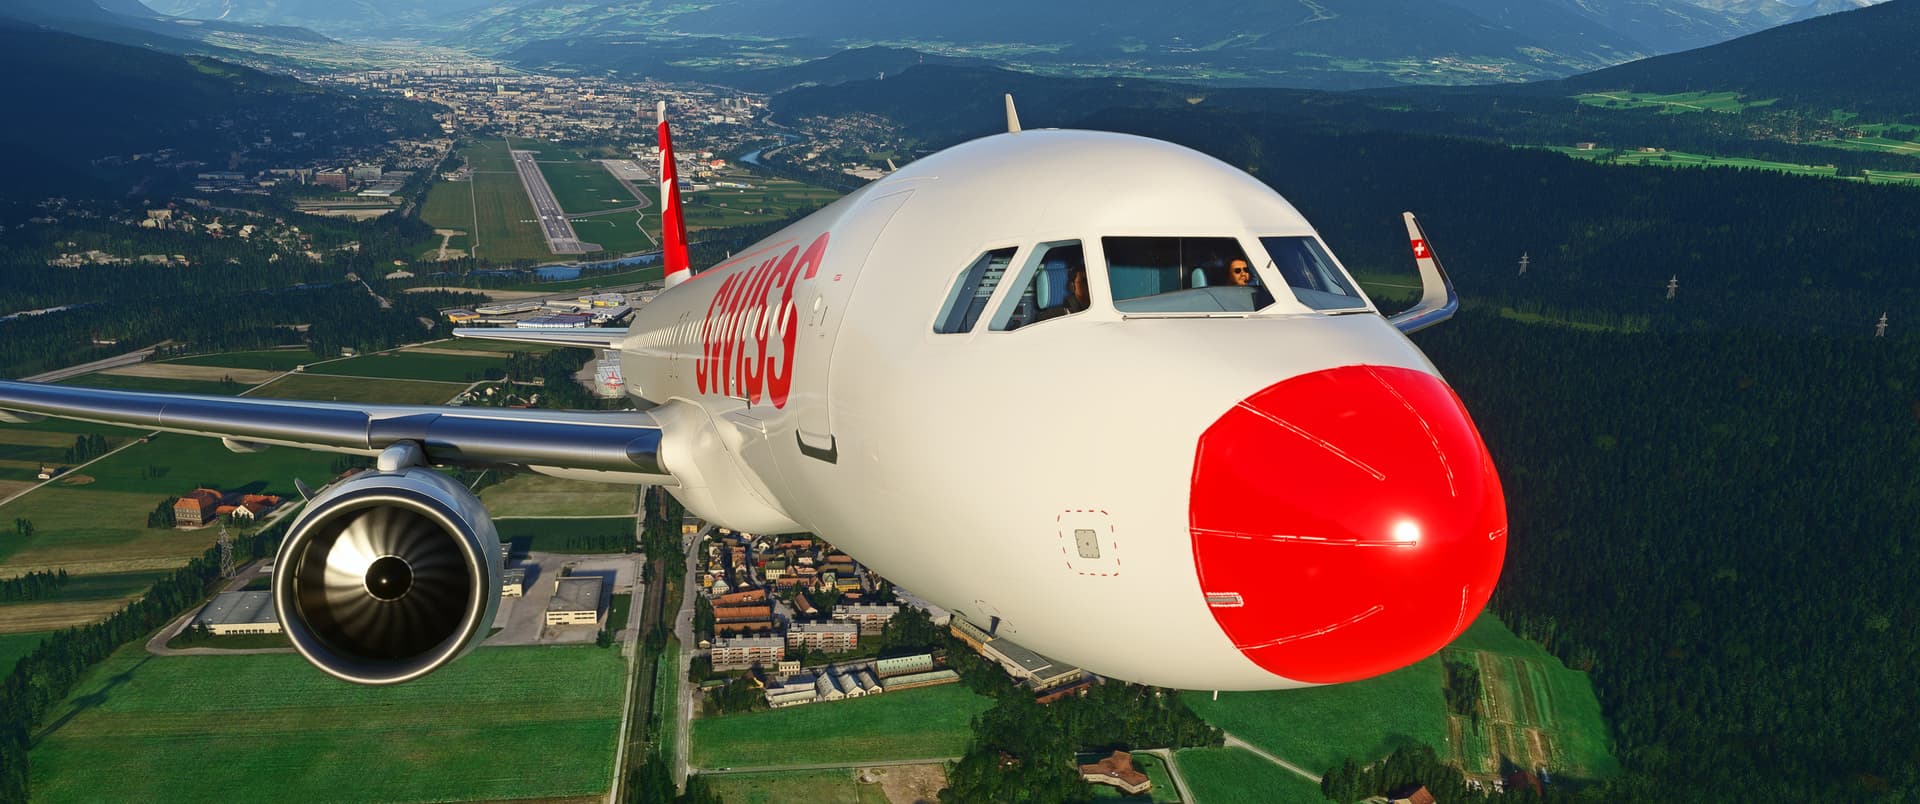 A head on view of a jetliner with a Swissair livery taking off from Innsbruck. The nose of the plane is painted red.